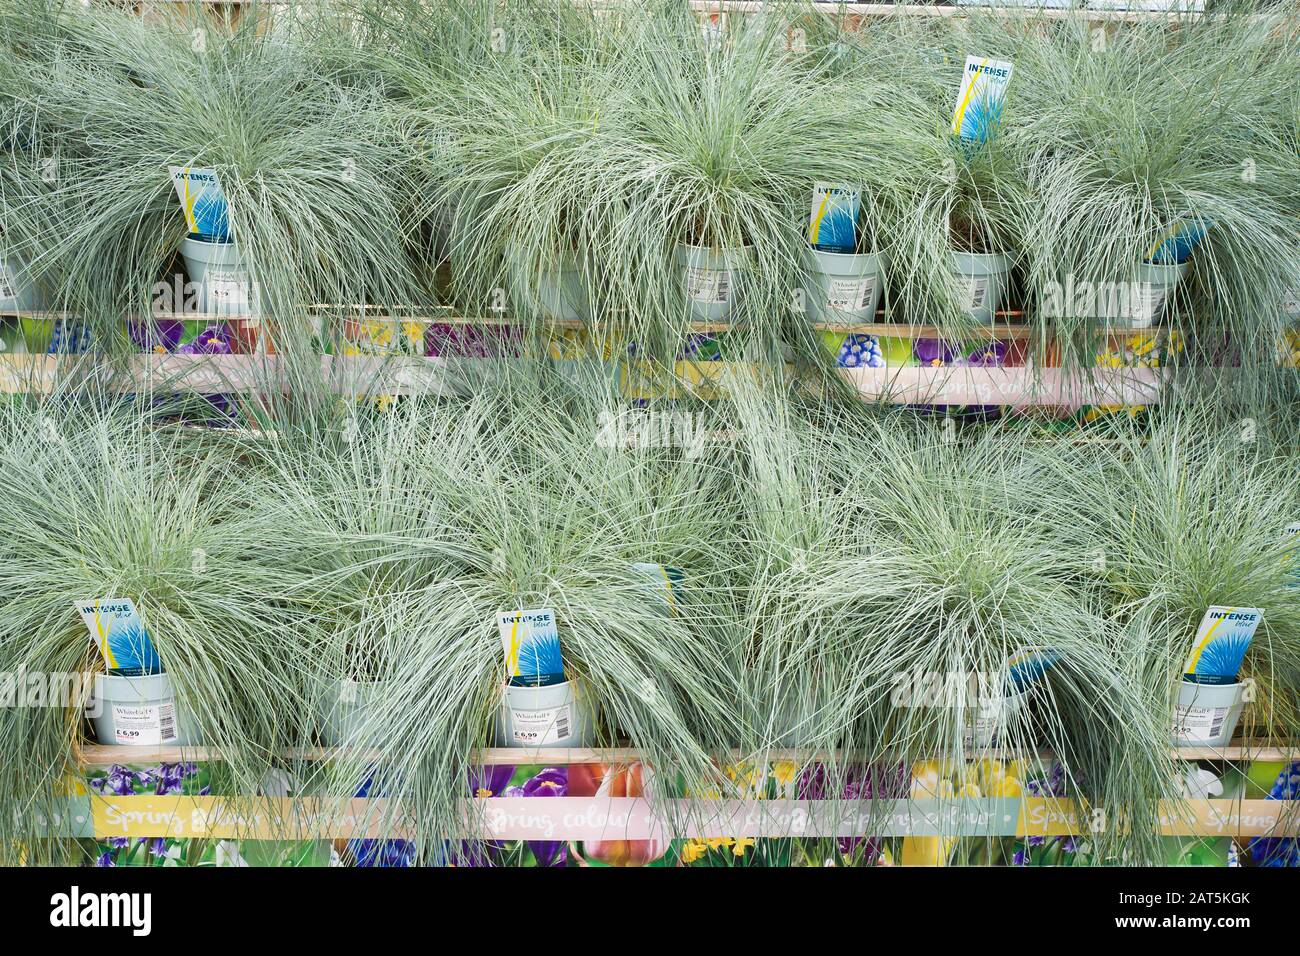 A display of low growing ornamental grasses Festuca glauca Intense Blue for sale in an English garden centre Stock Photo